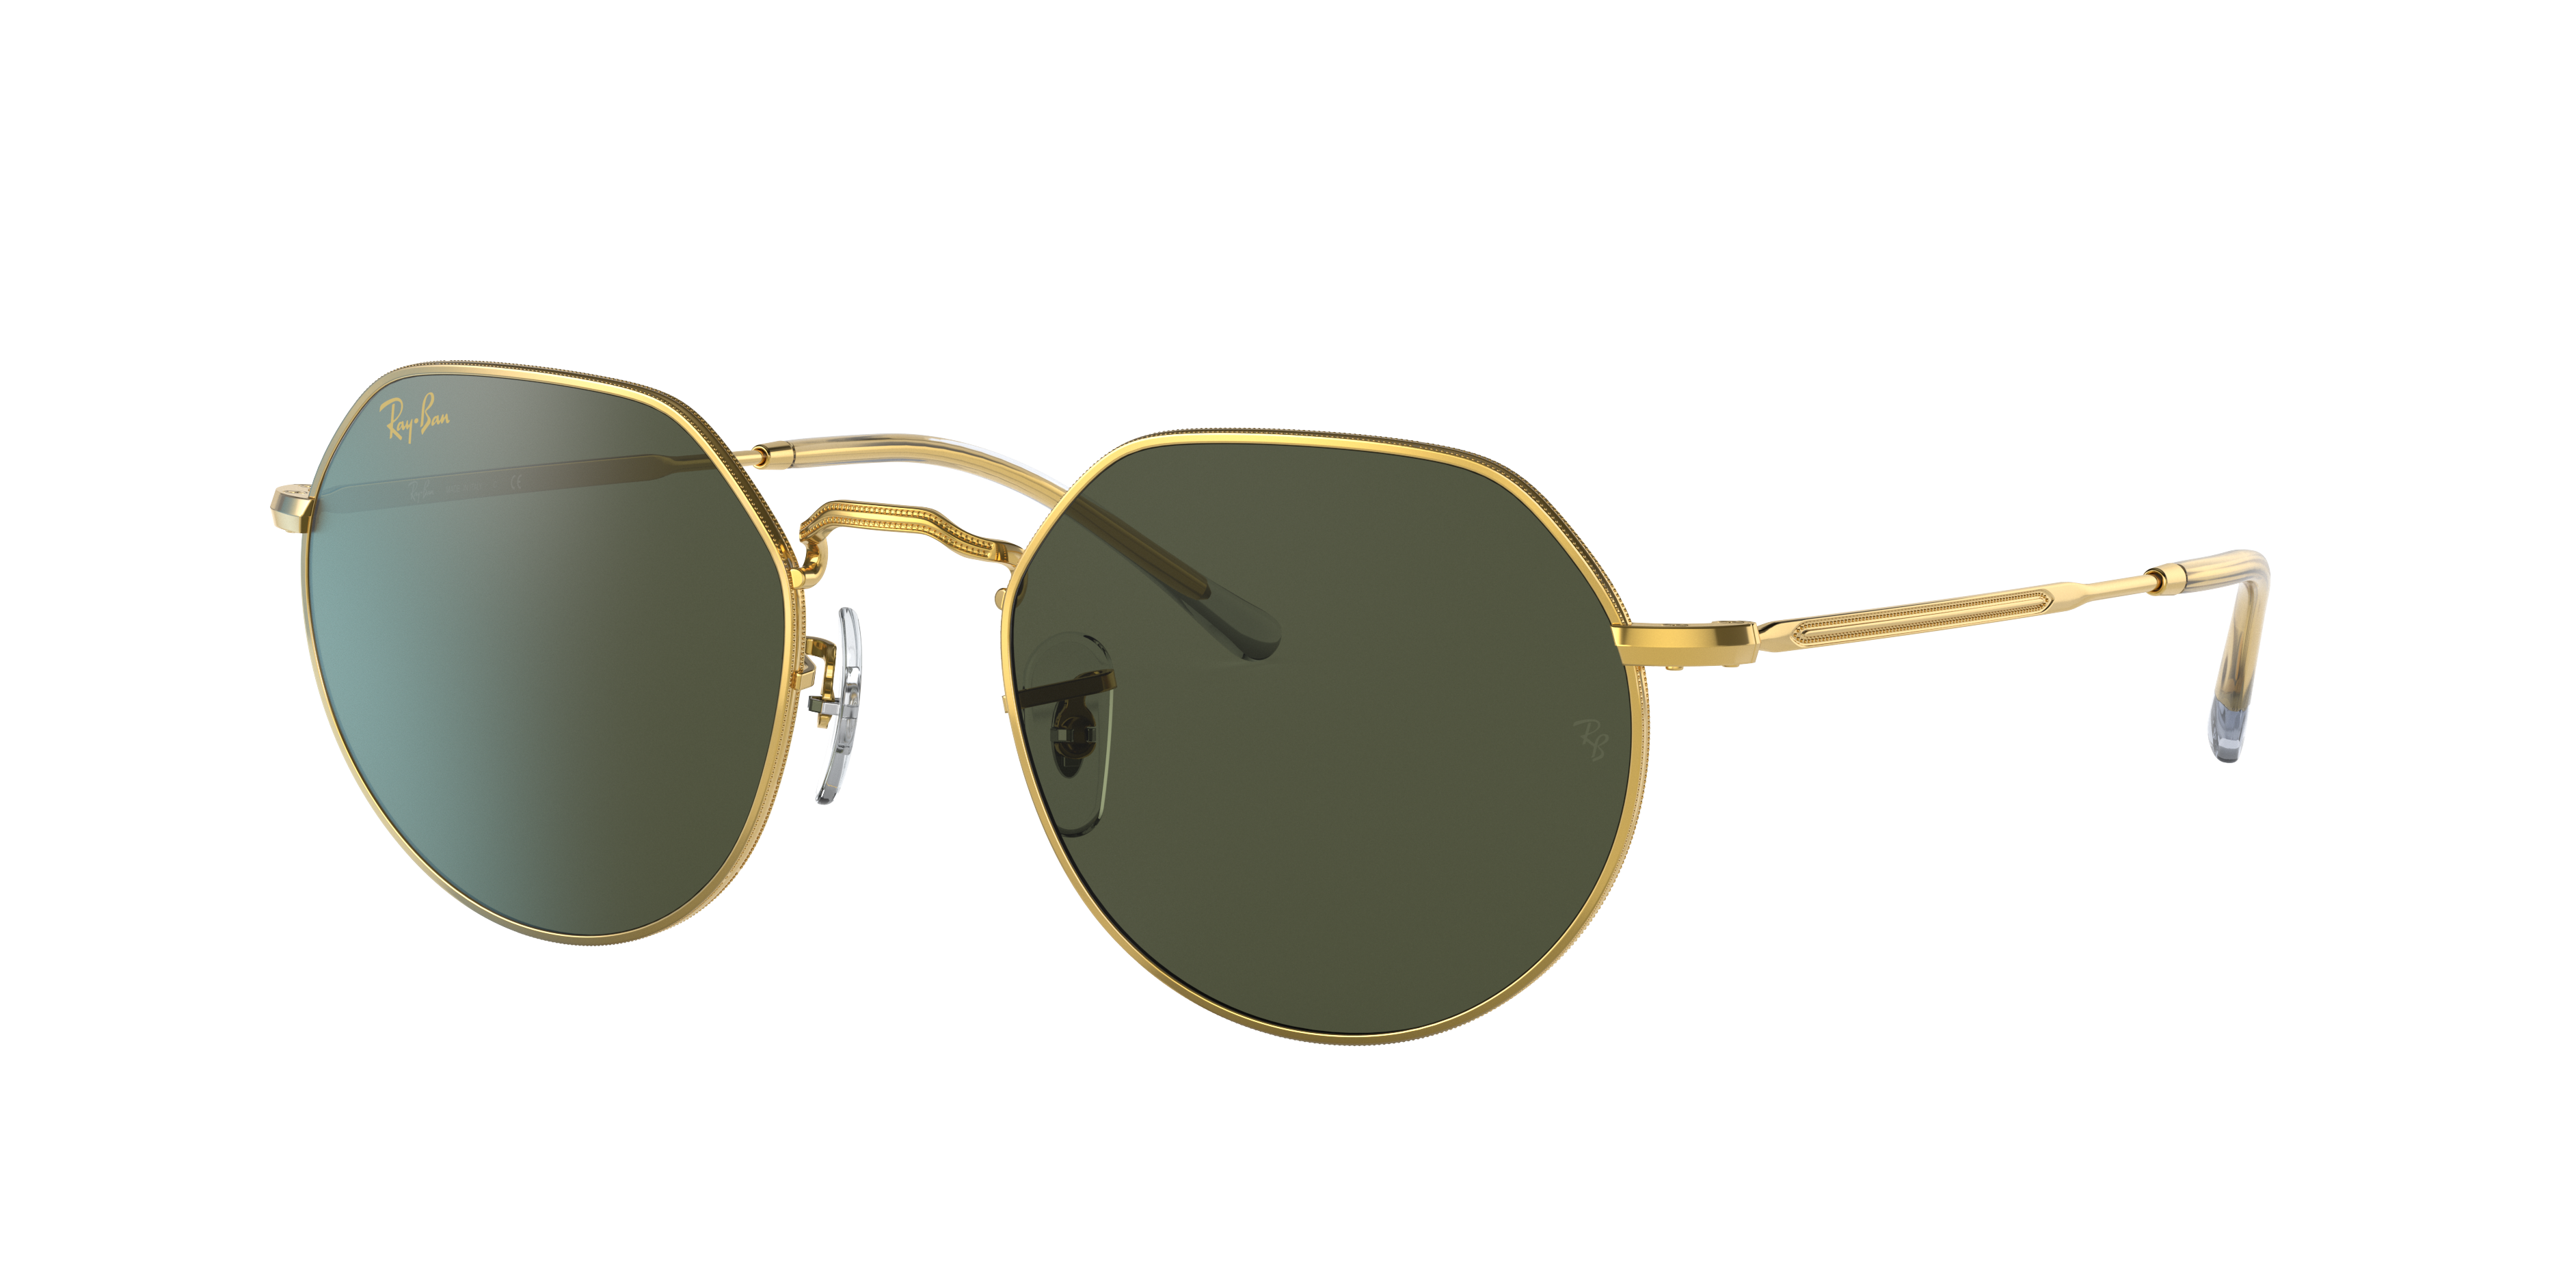 5 in 1 sunglasses ray ban